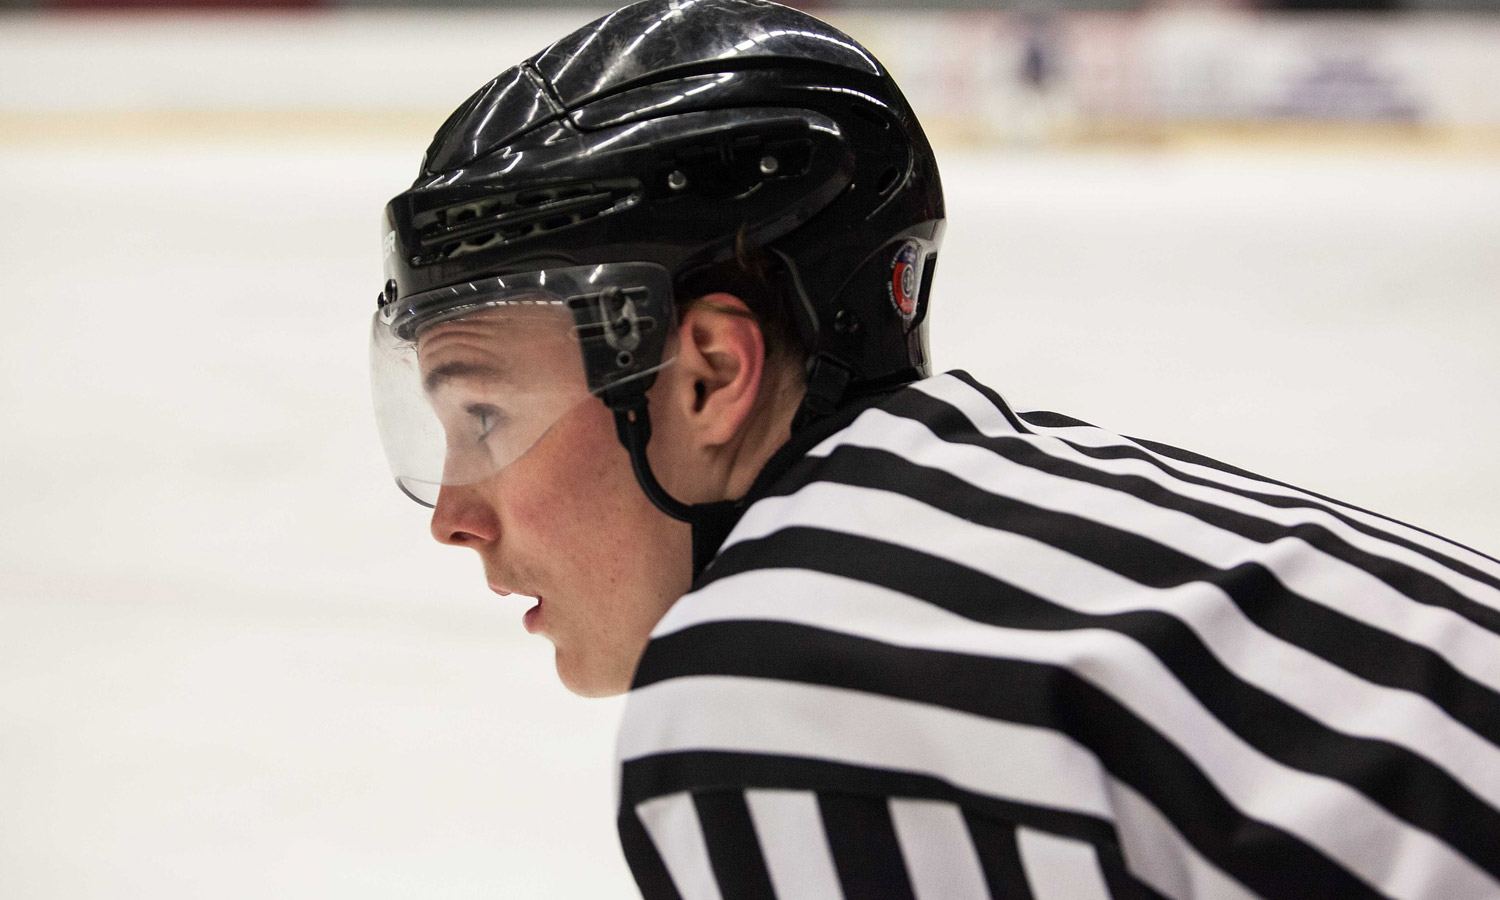 How Many Referees in a Hockey Game?